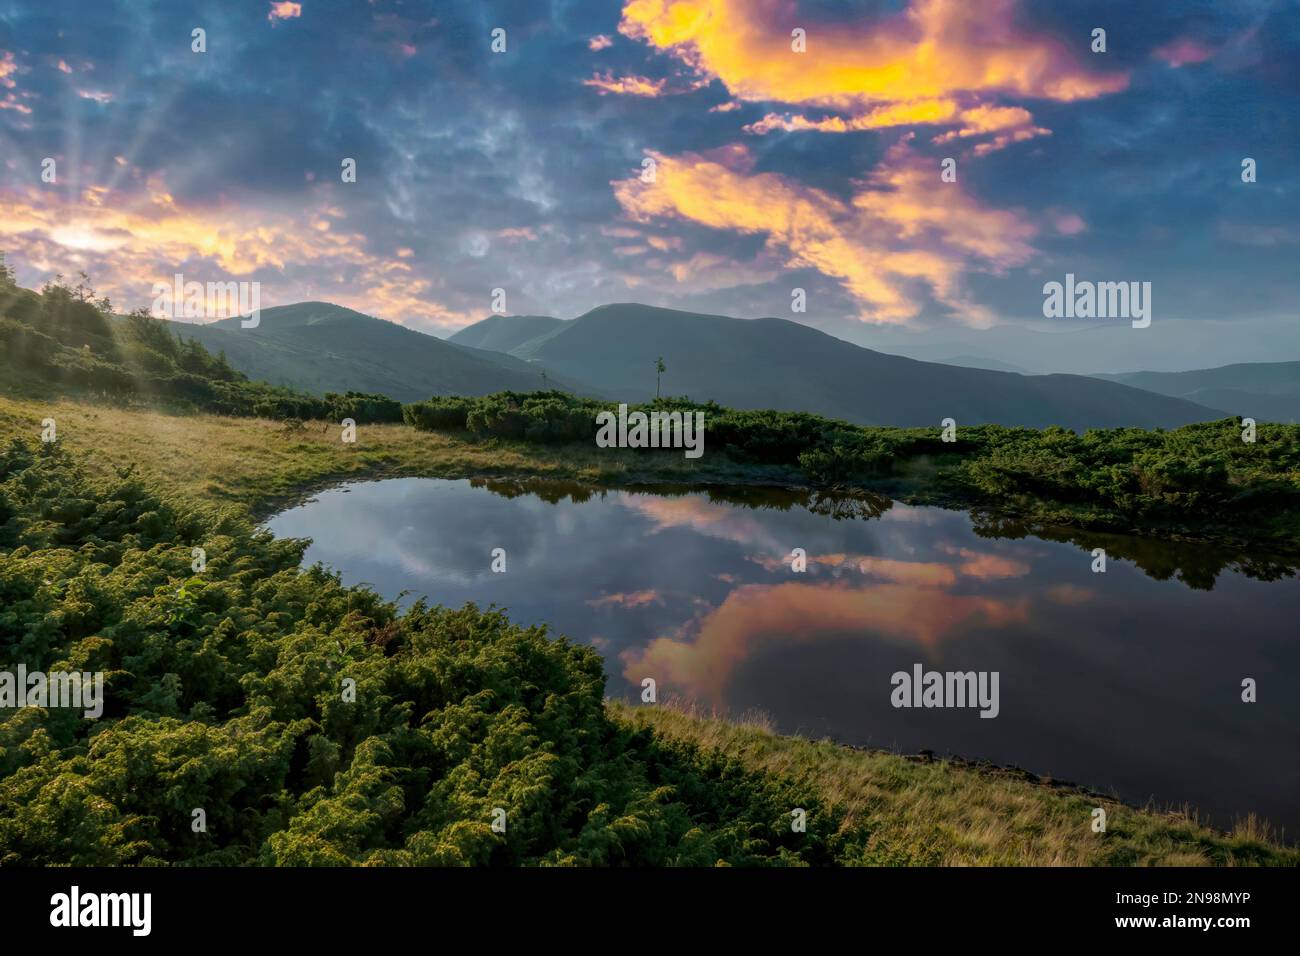 Colorful sunset sky reflecting in the small mountain lake on alpine meadow. Dramatic outdoor landscape. Stock Photo